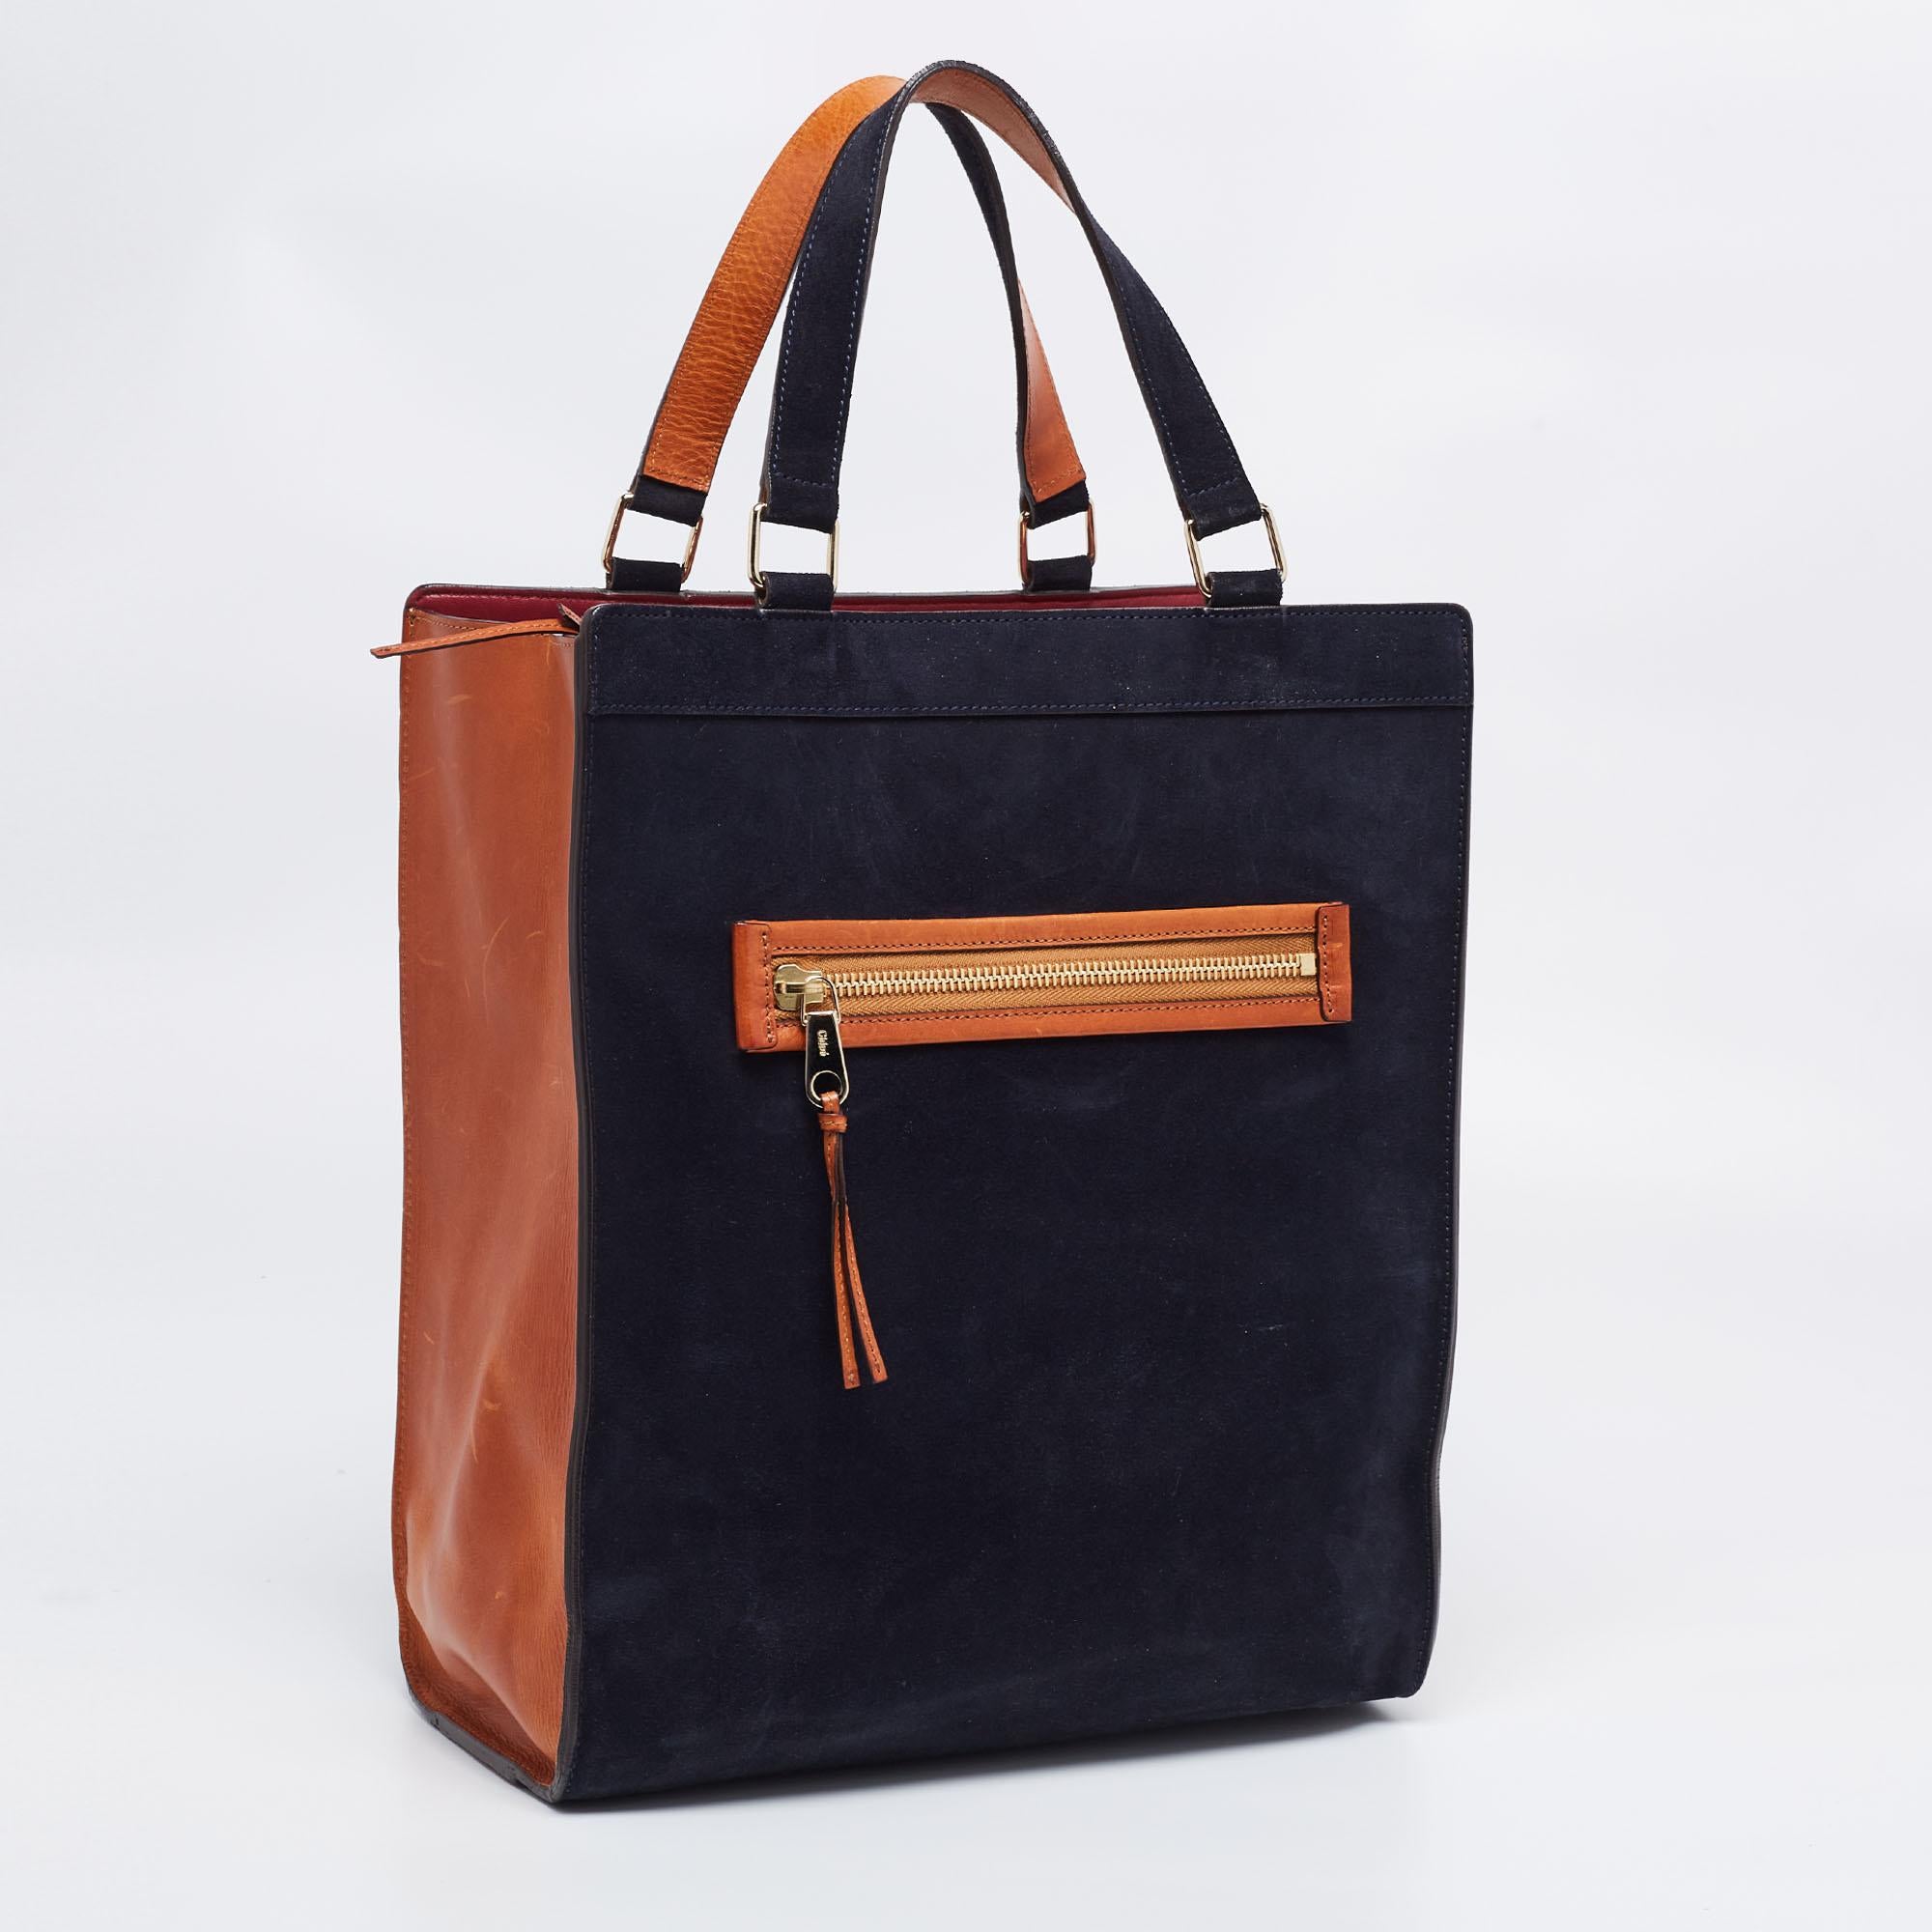 Black Chloe Navy Blue/Tan Suede and Leather Top Zip Tote